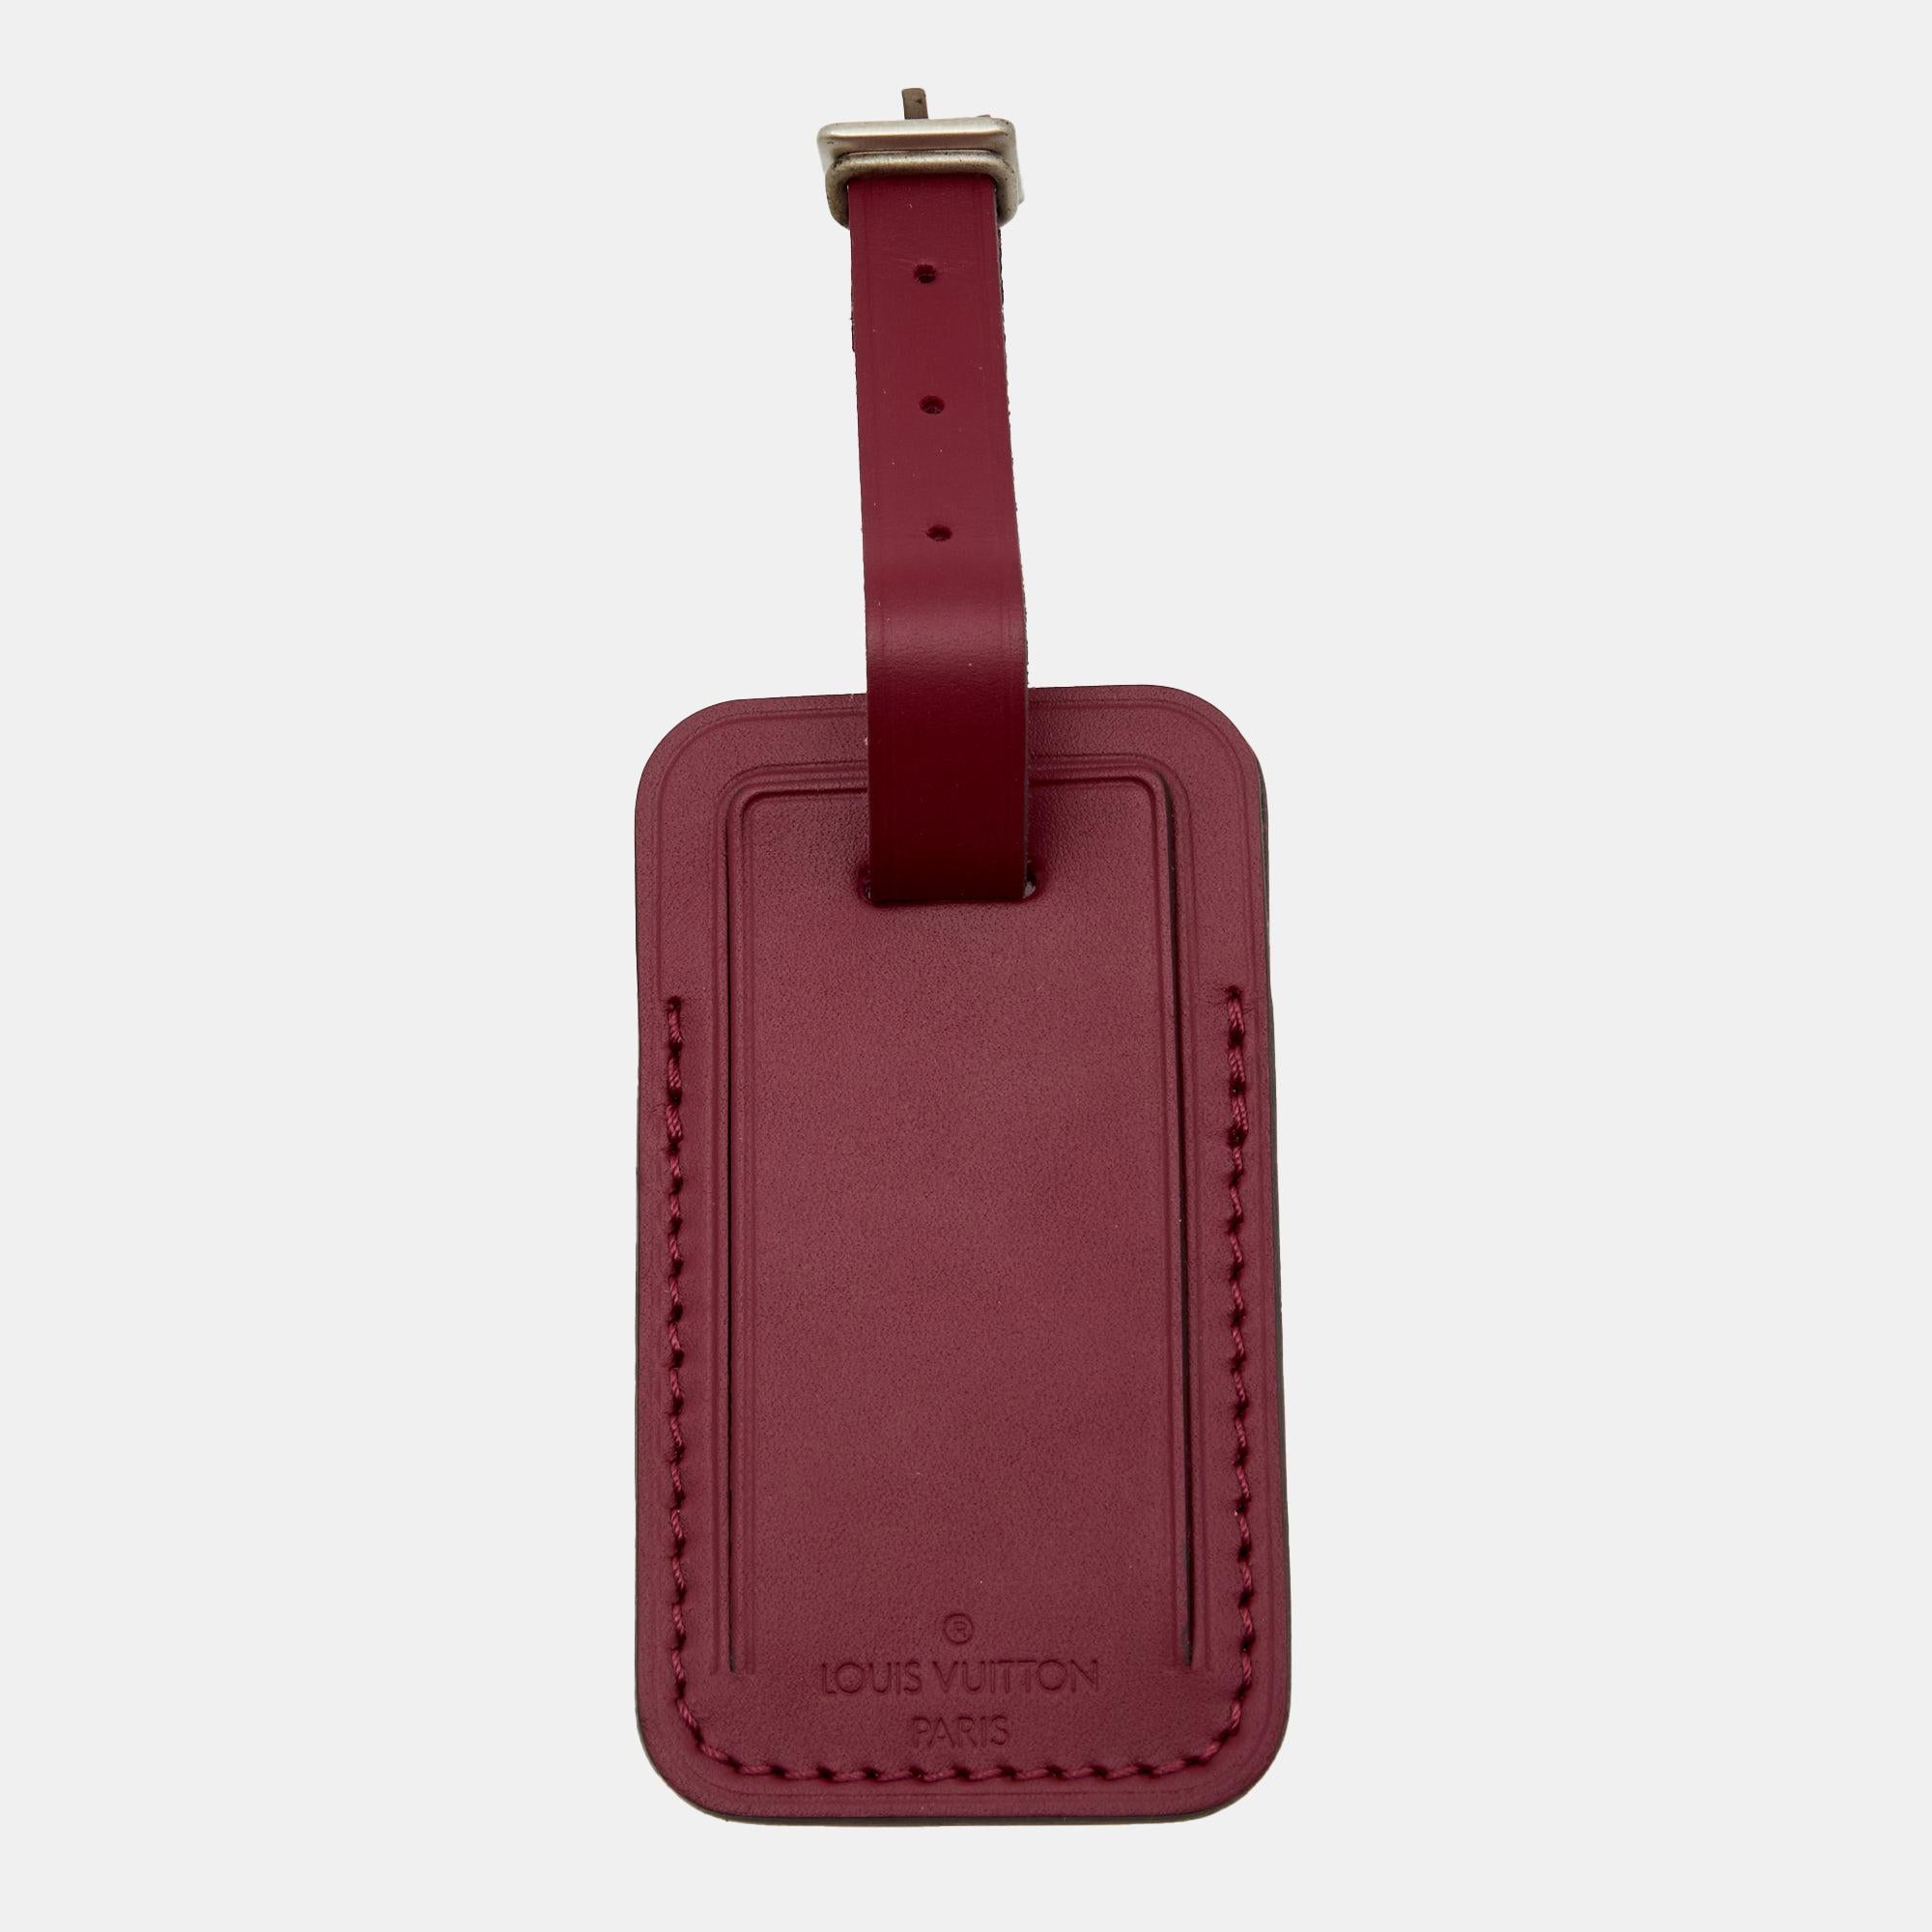 Brown Louis Vuitton Burgundy Leather Luggage Name Tag